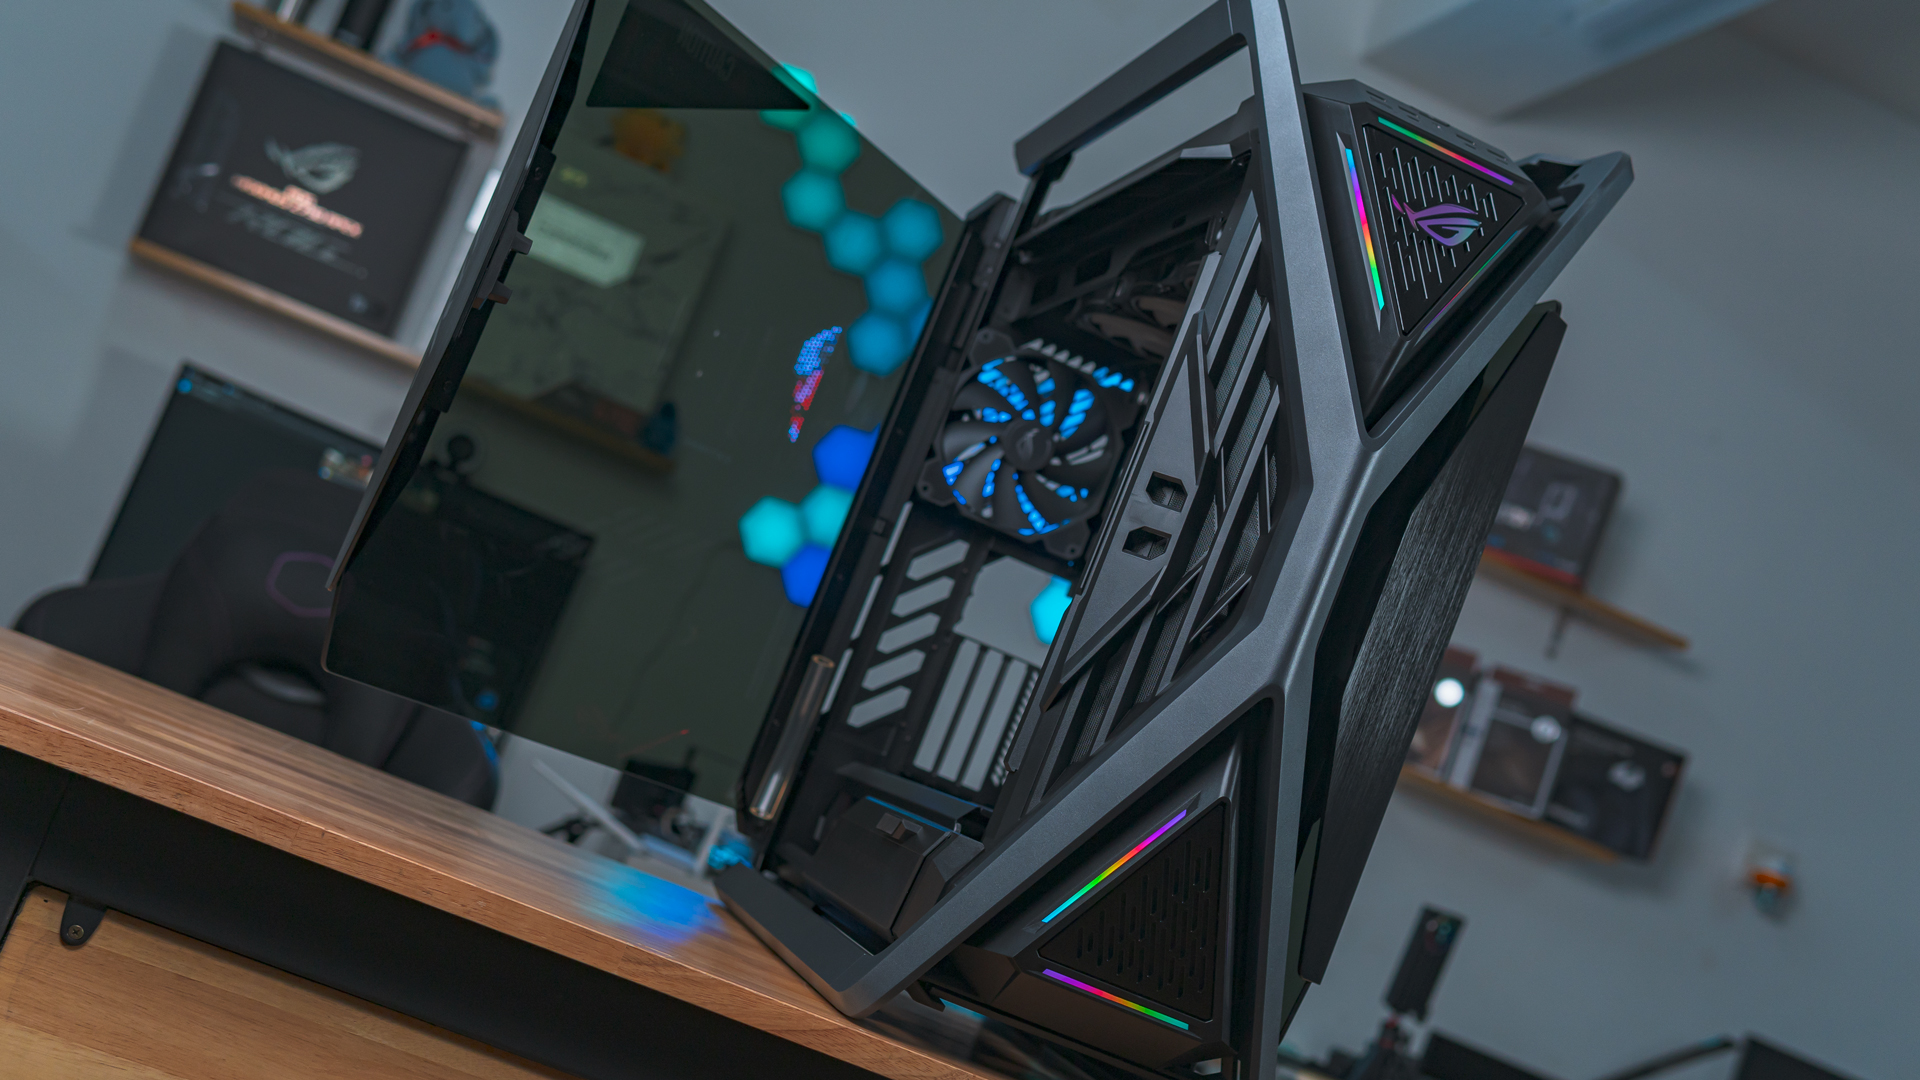 Big, expensive but does it perform?The ROG Hyperion GR701 Ultimate